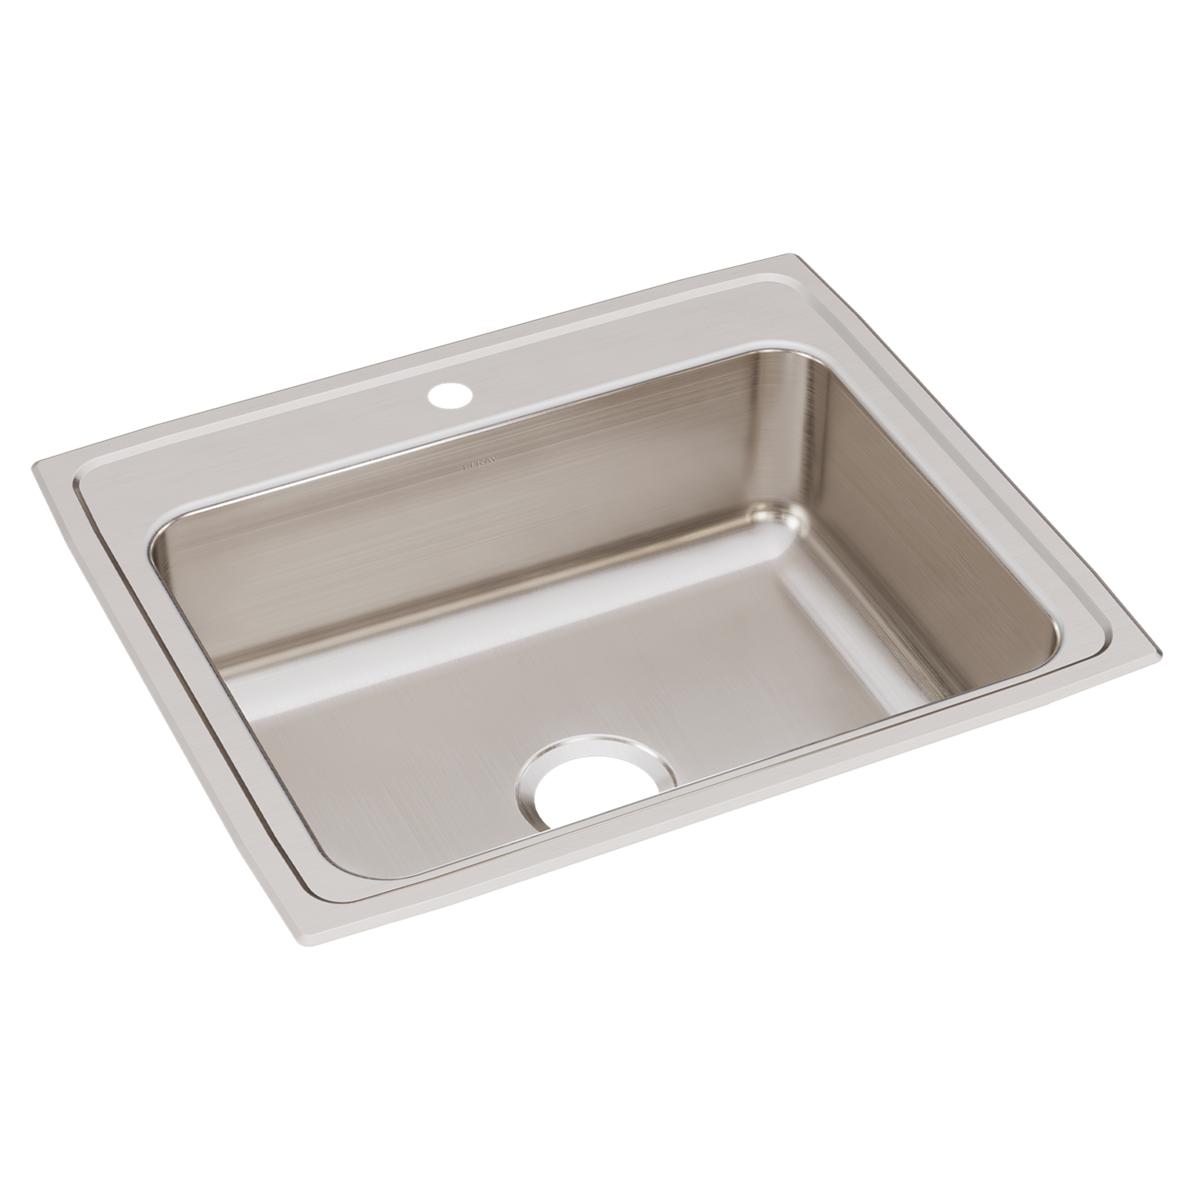 Elkay Lustertone Classic 25" x 21-1/4" x 7-7/8" Single Bowl Drop-in Sink with Quick-clip